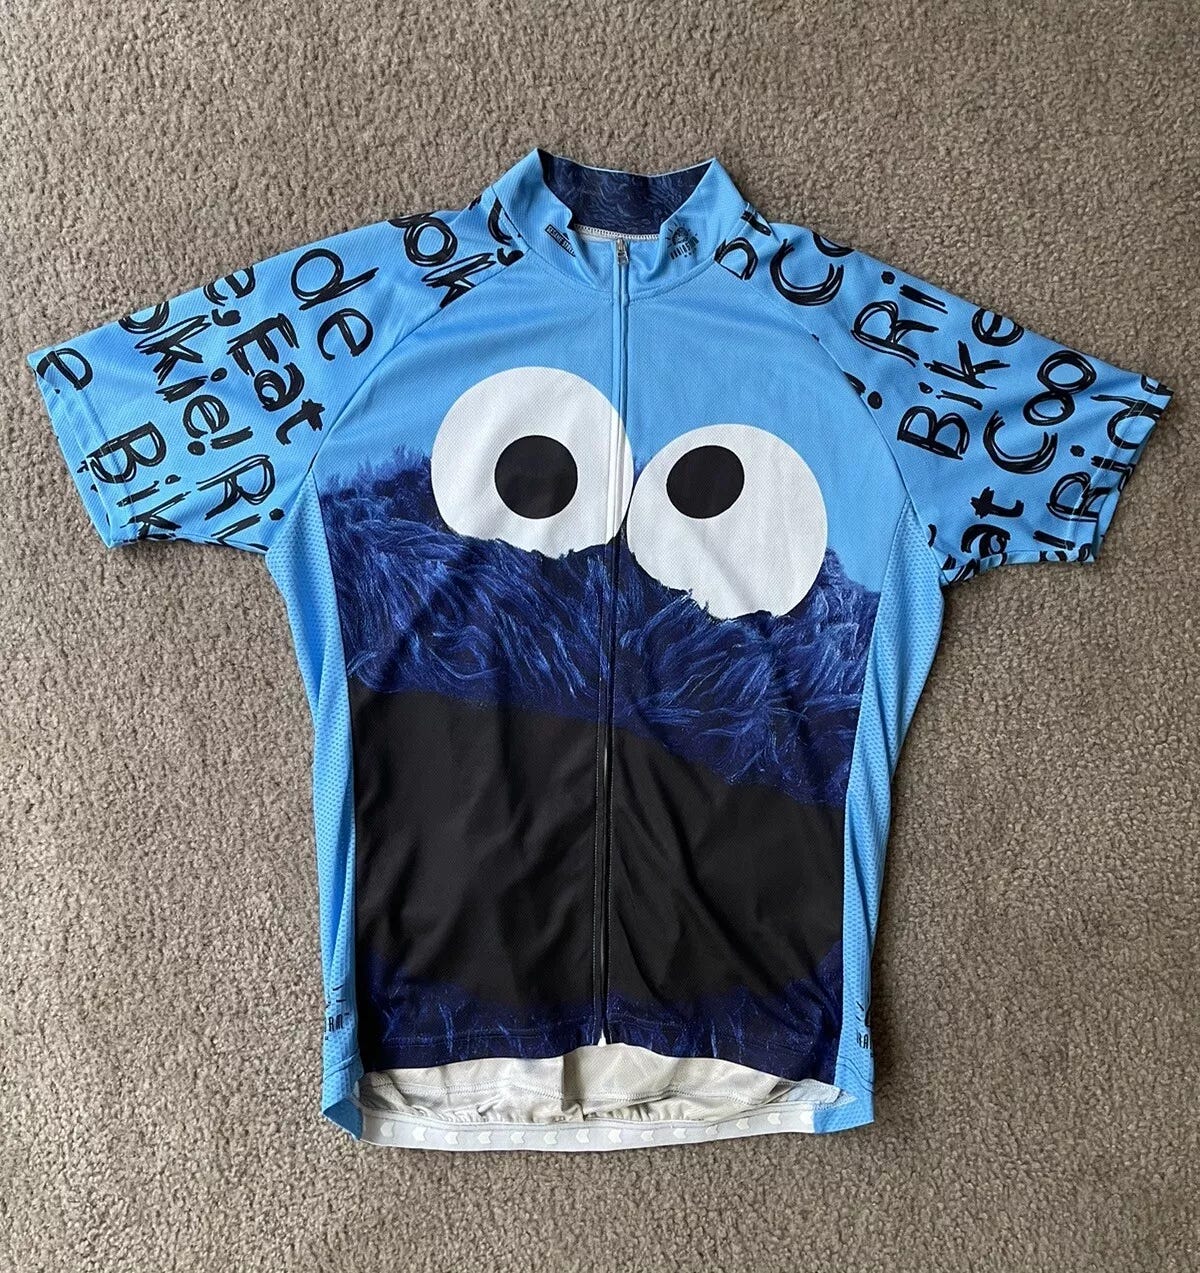 Brainstorm Gear Sesame Street Cookie Monster Mens Full-Zip XL Cycling Jersey Top - Picture 1 of 18